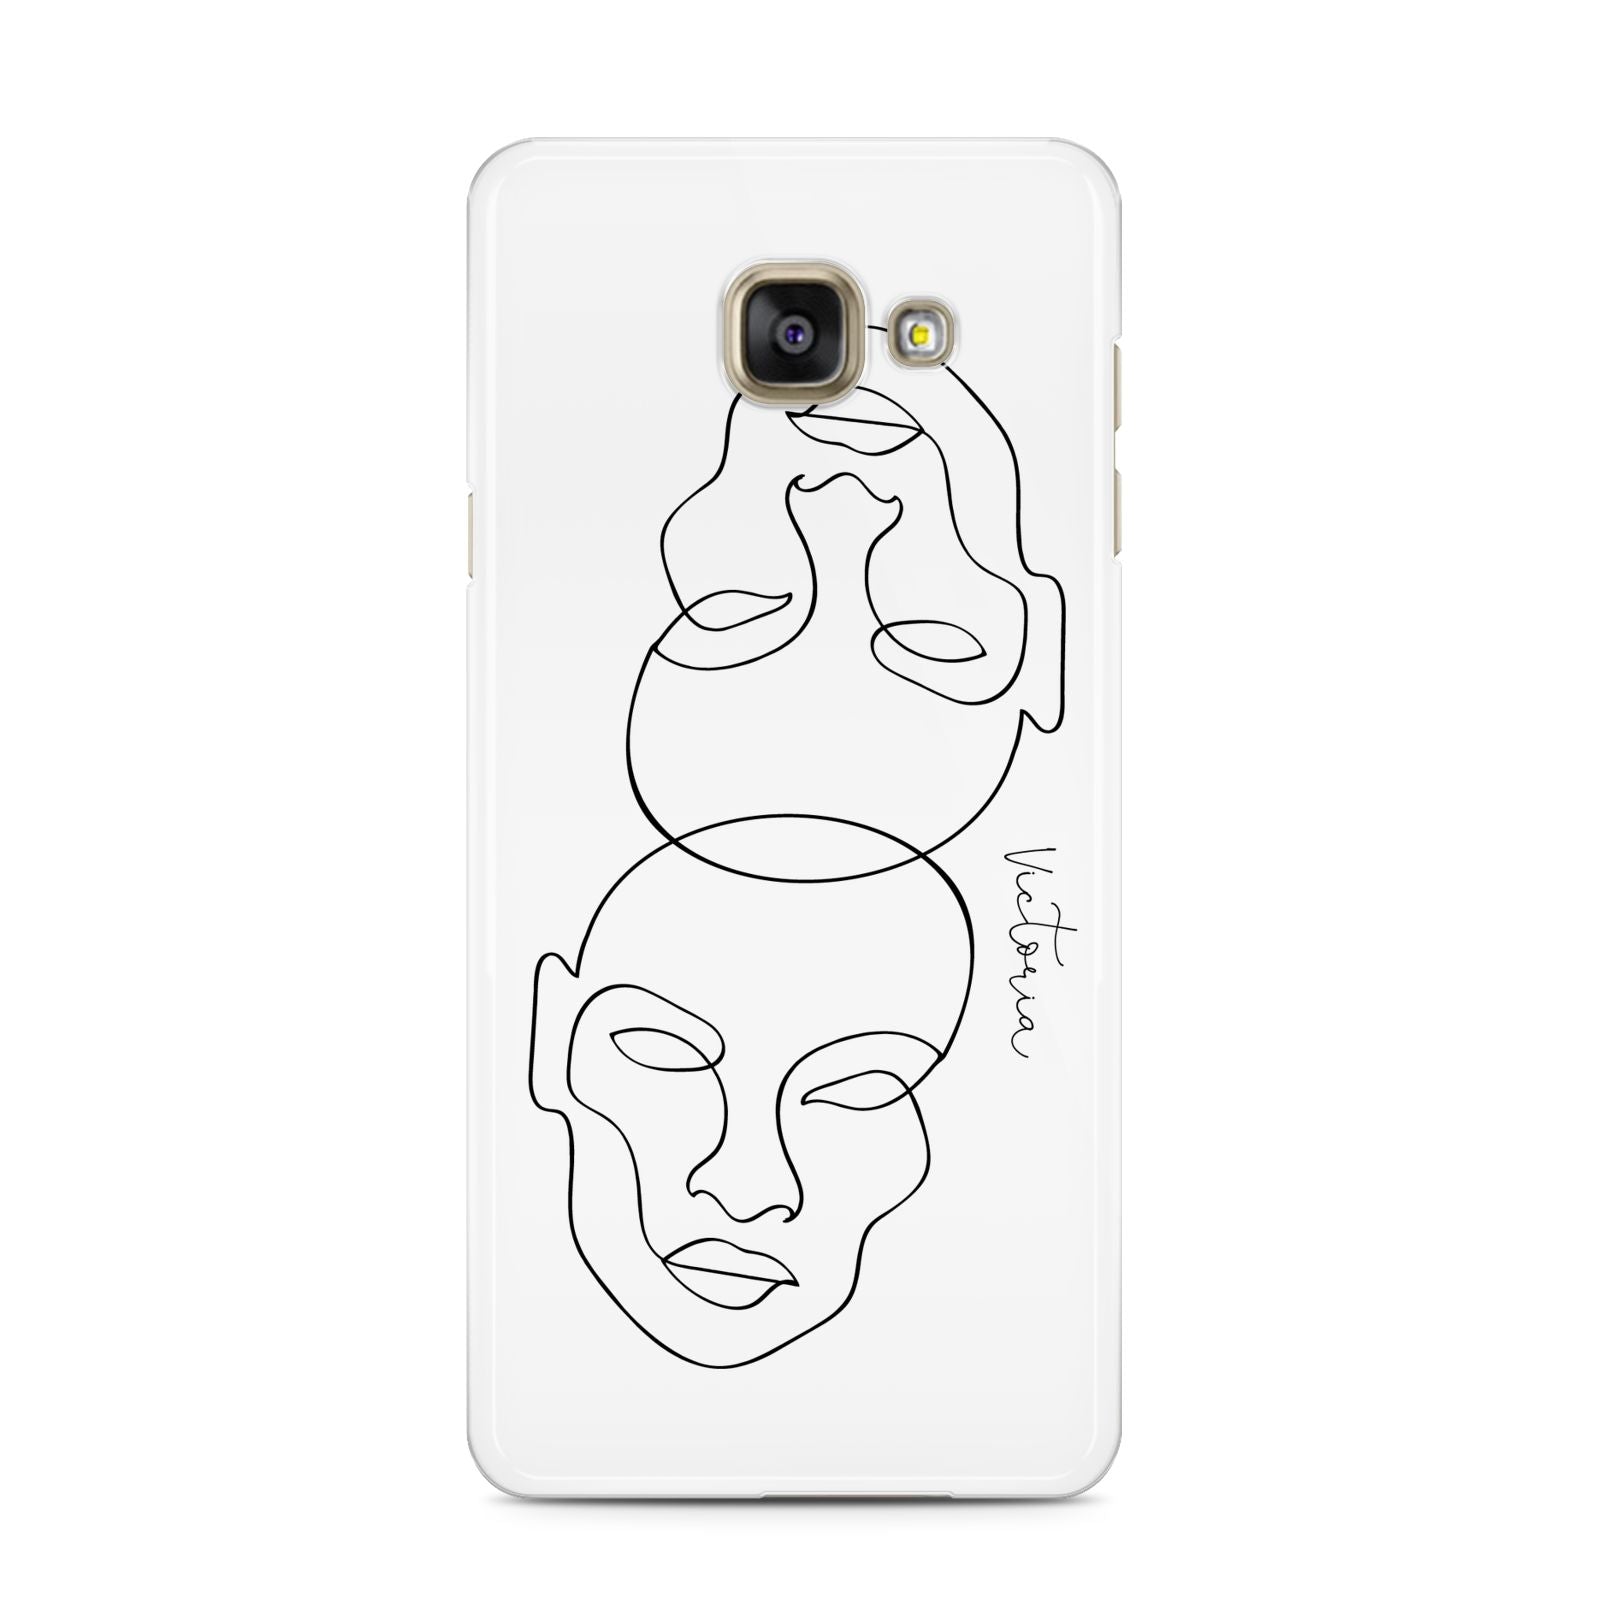 Personalised White Line Art Samsung Galaxy A3 2016 Case on gold phone